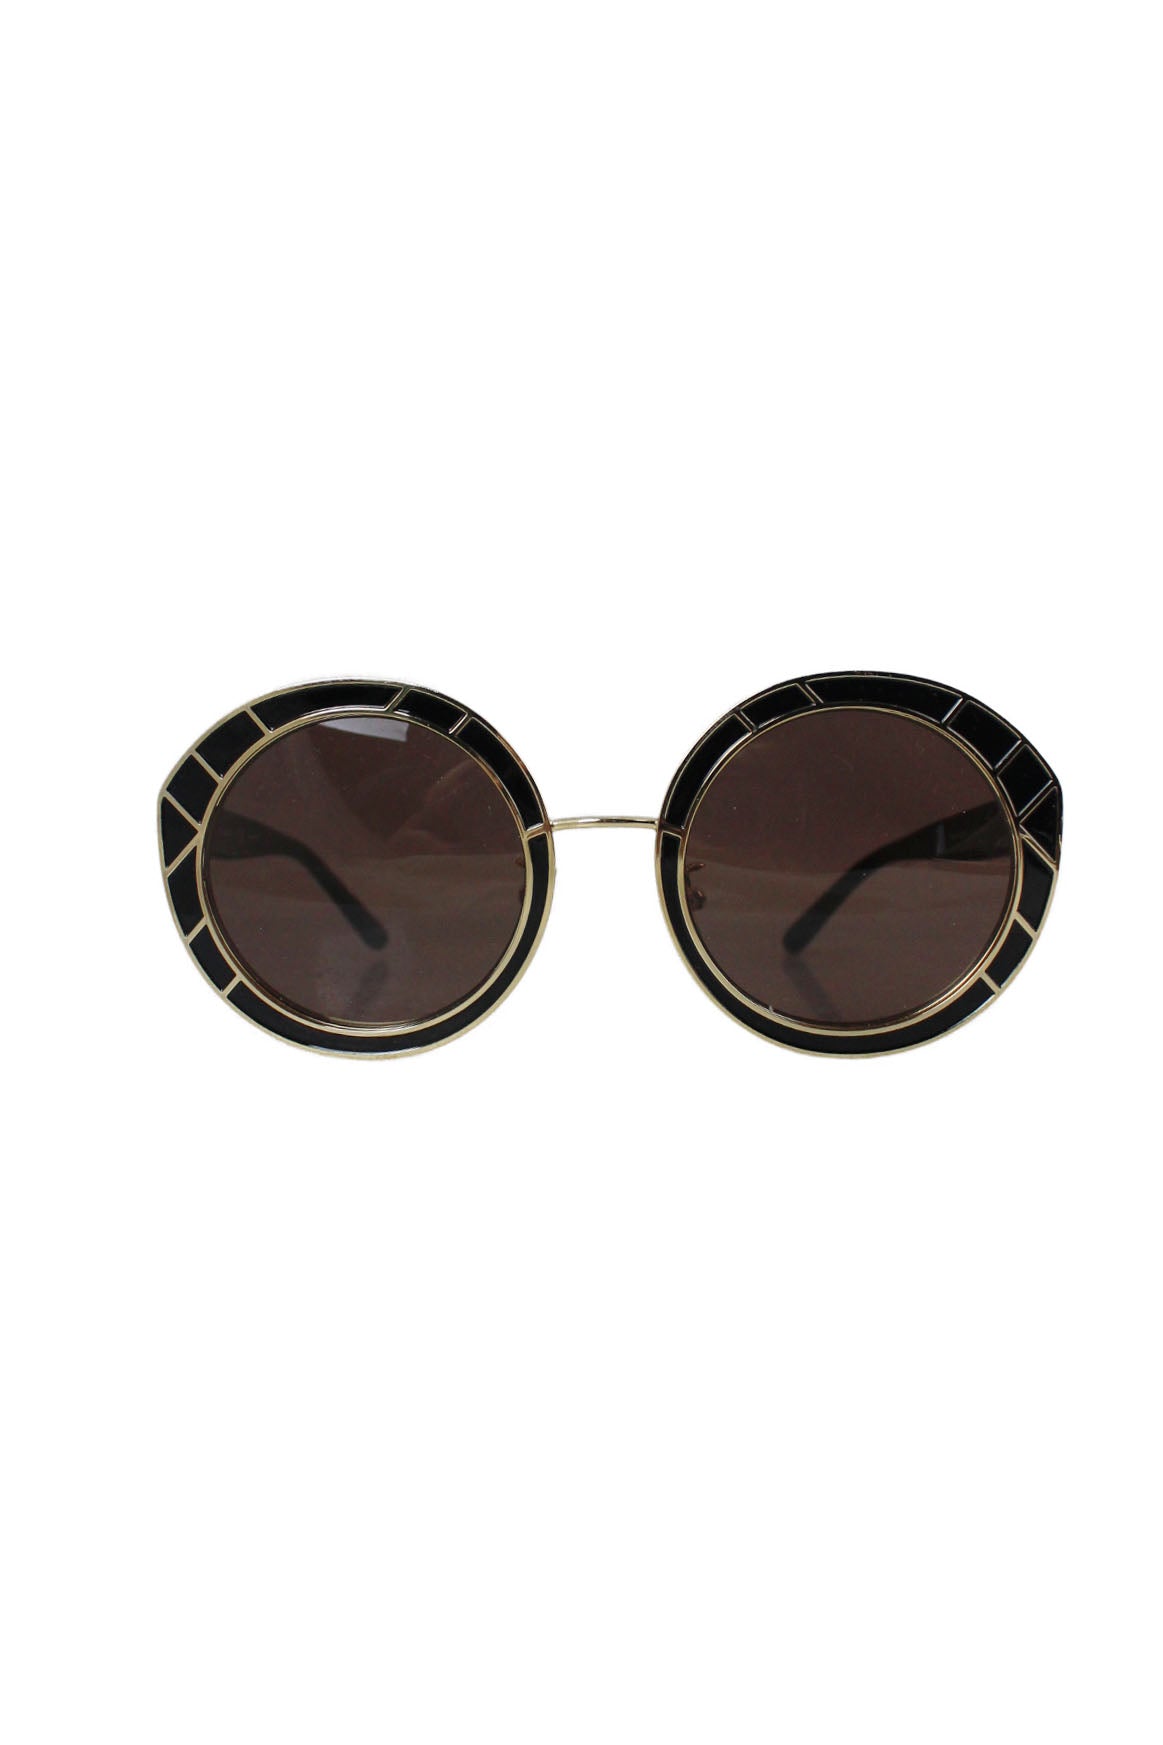 description: tory burch gold and black metal rounded frame. features gold-tone metal hardware throughout, black tinted lenses and metal frame. comes with orange case. 